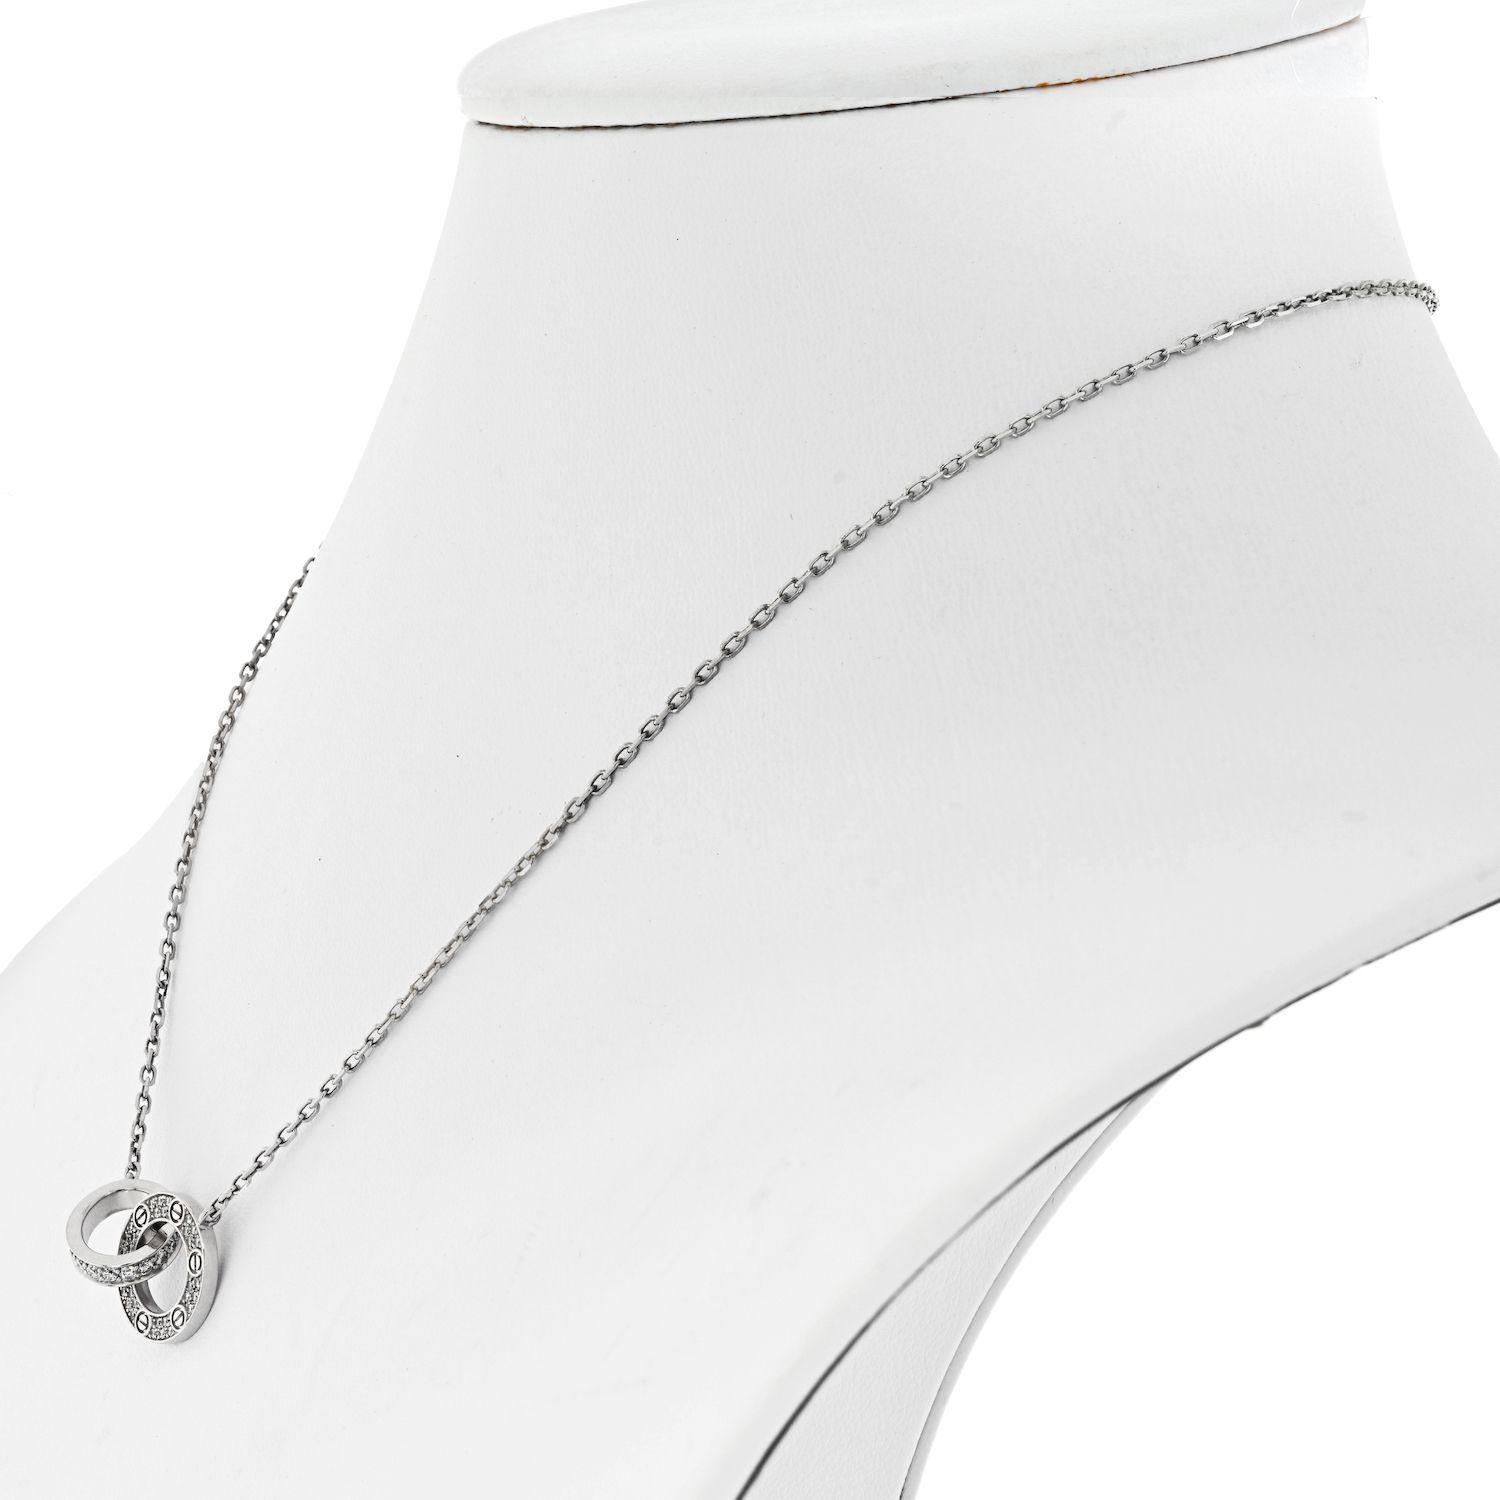 Cartier Love 18K White Gold Love Diamond Pave Pendant Necklace.
Celebrate timeless love with this necklace from Cartier's LOVE collection. It is made from 18K white gold and the chain holds two interlocking rings pendant decorated with the iconic